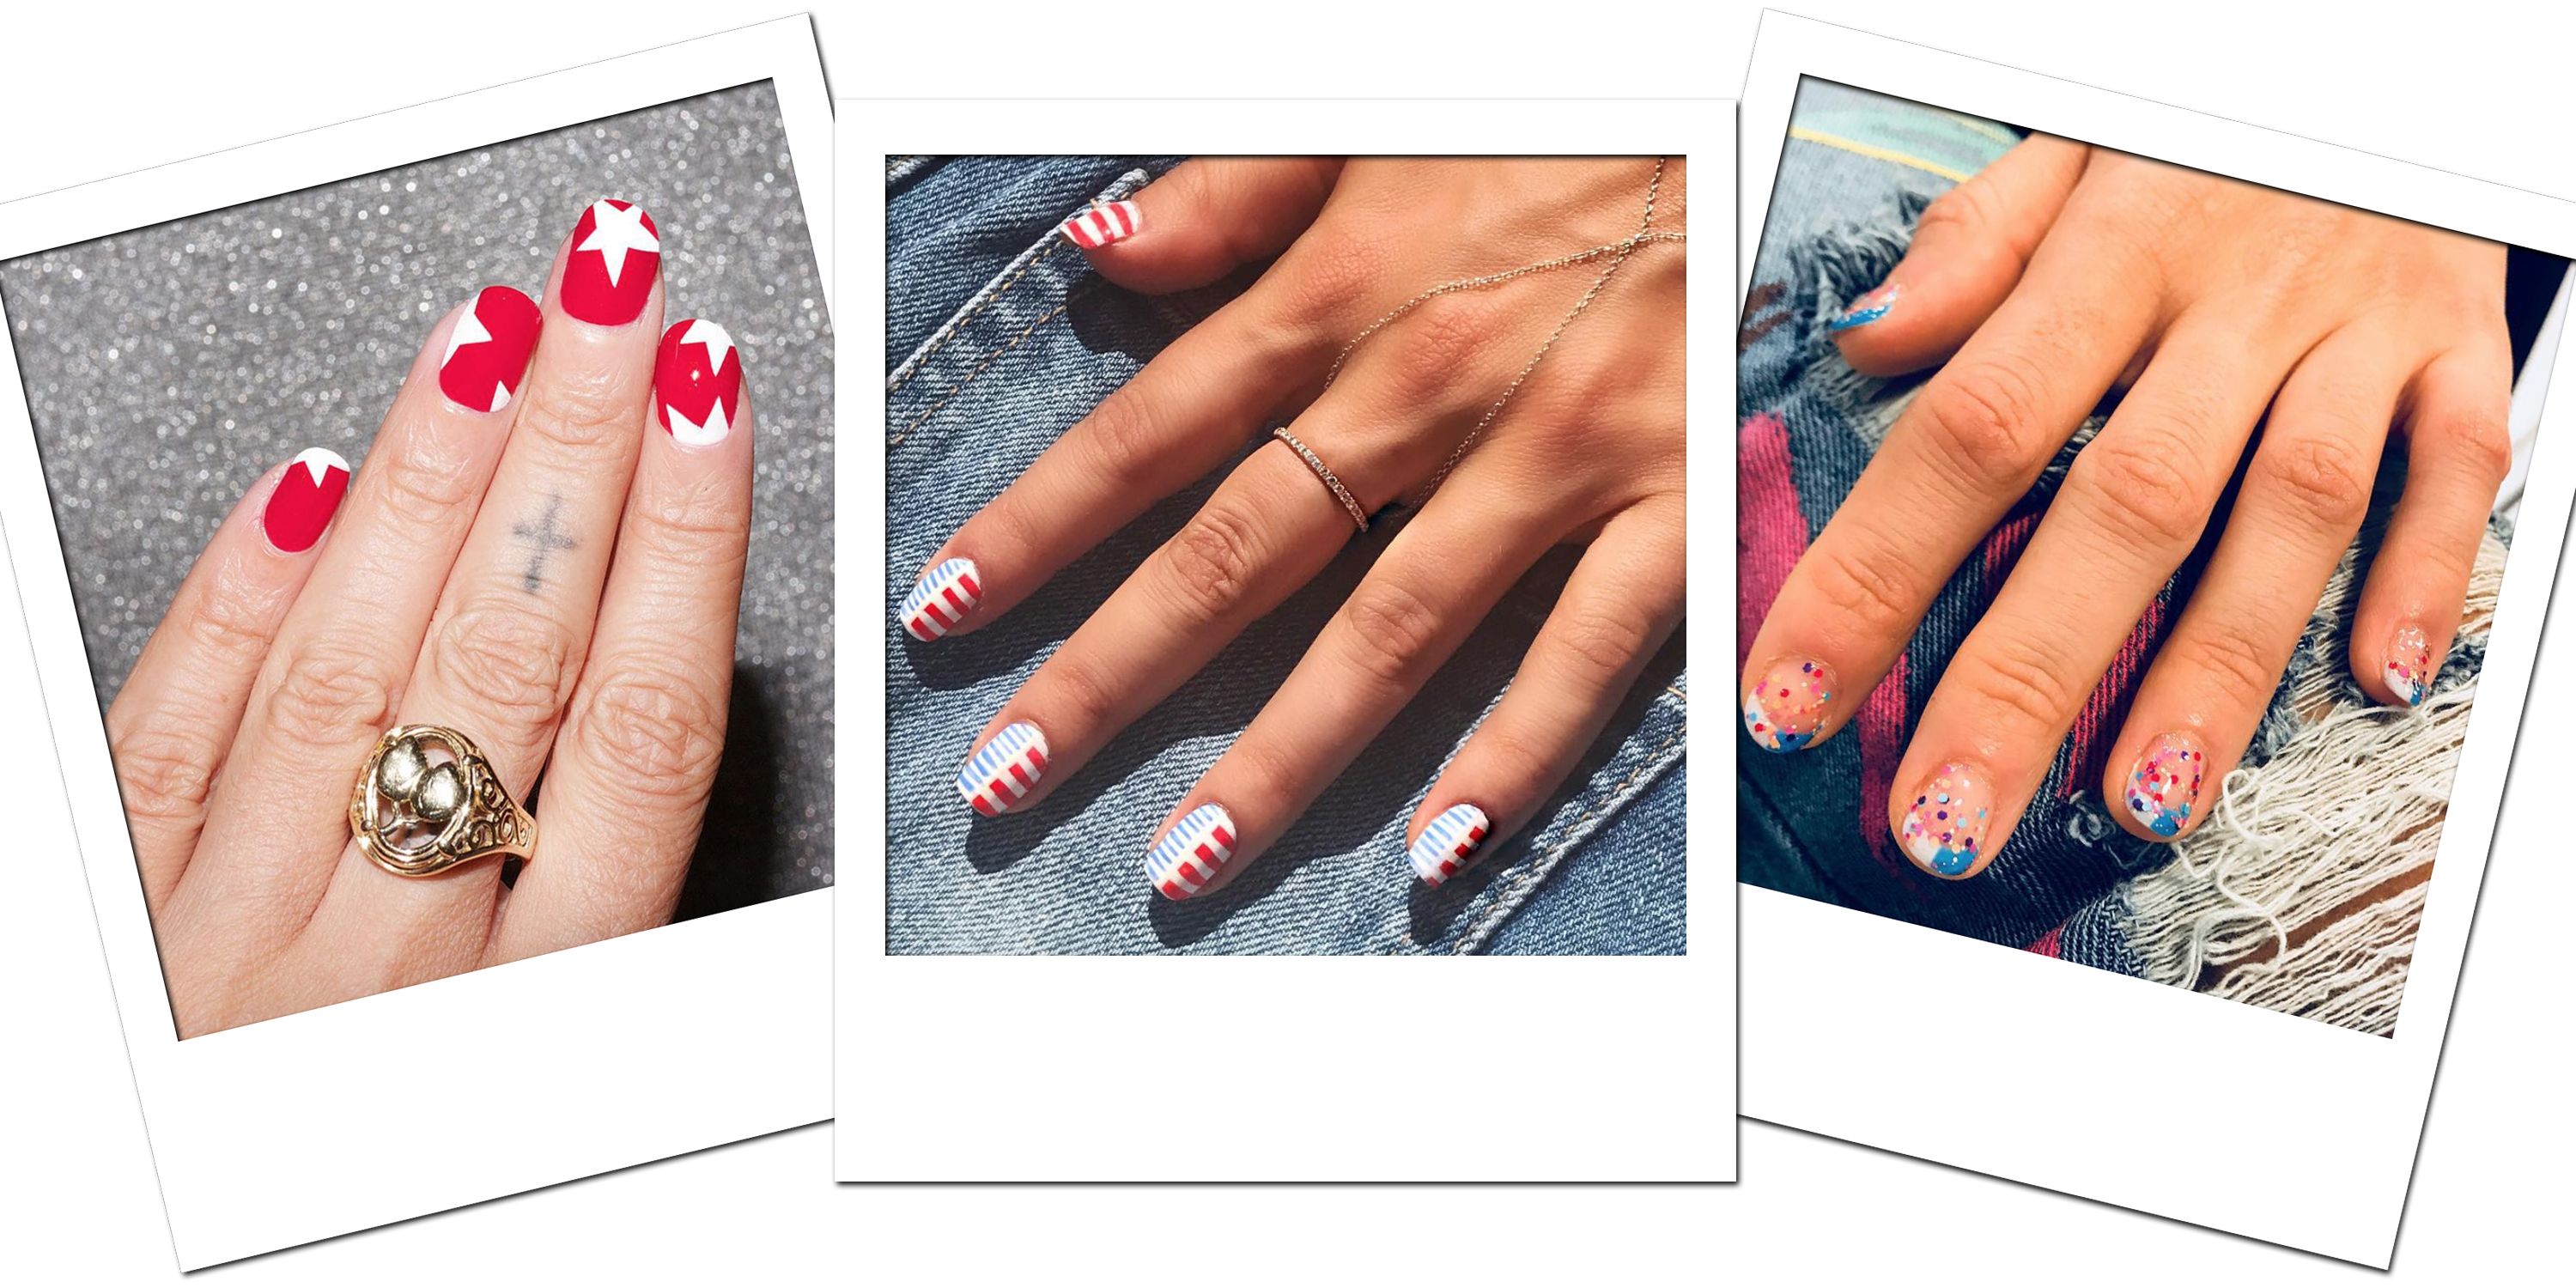 3. How to Create Festive Fourth of July Nail Art at Home - wide 5